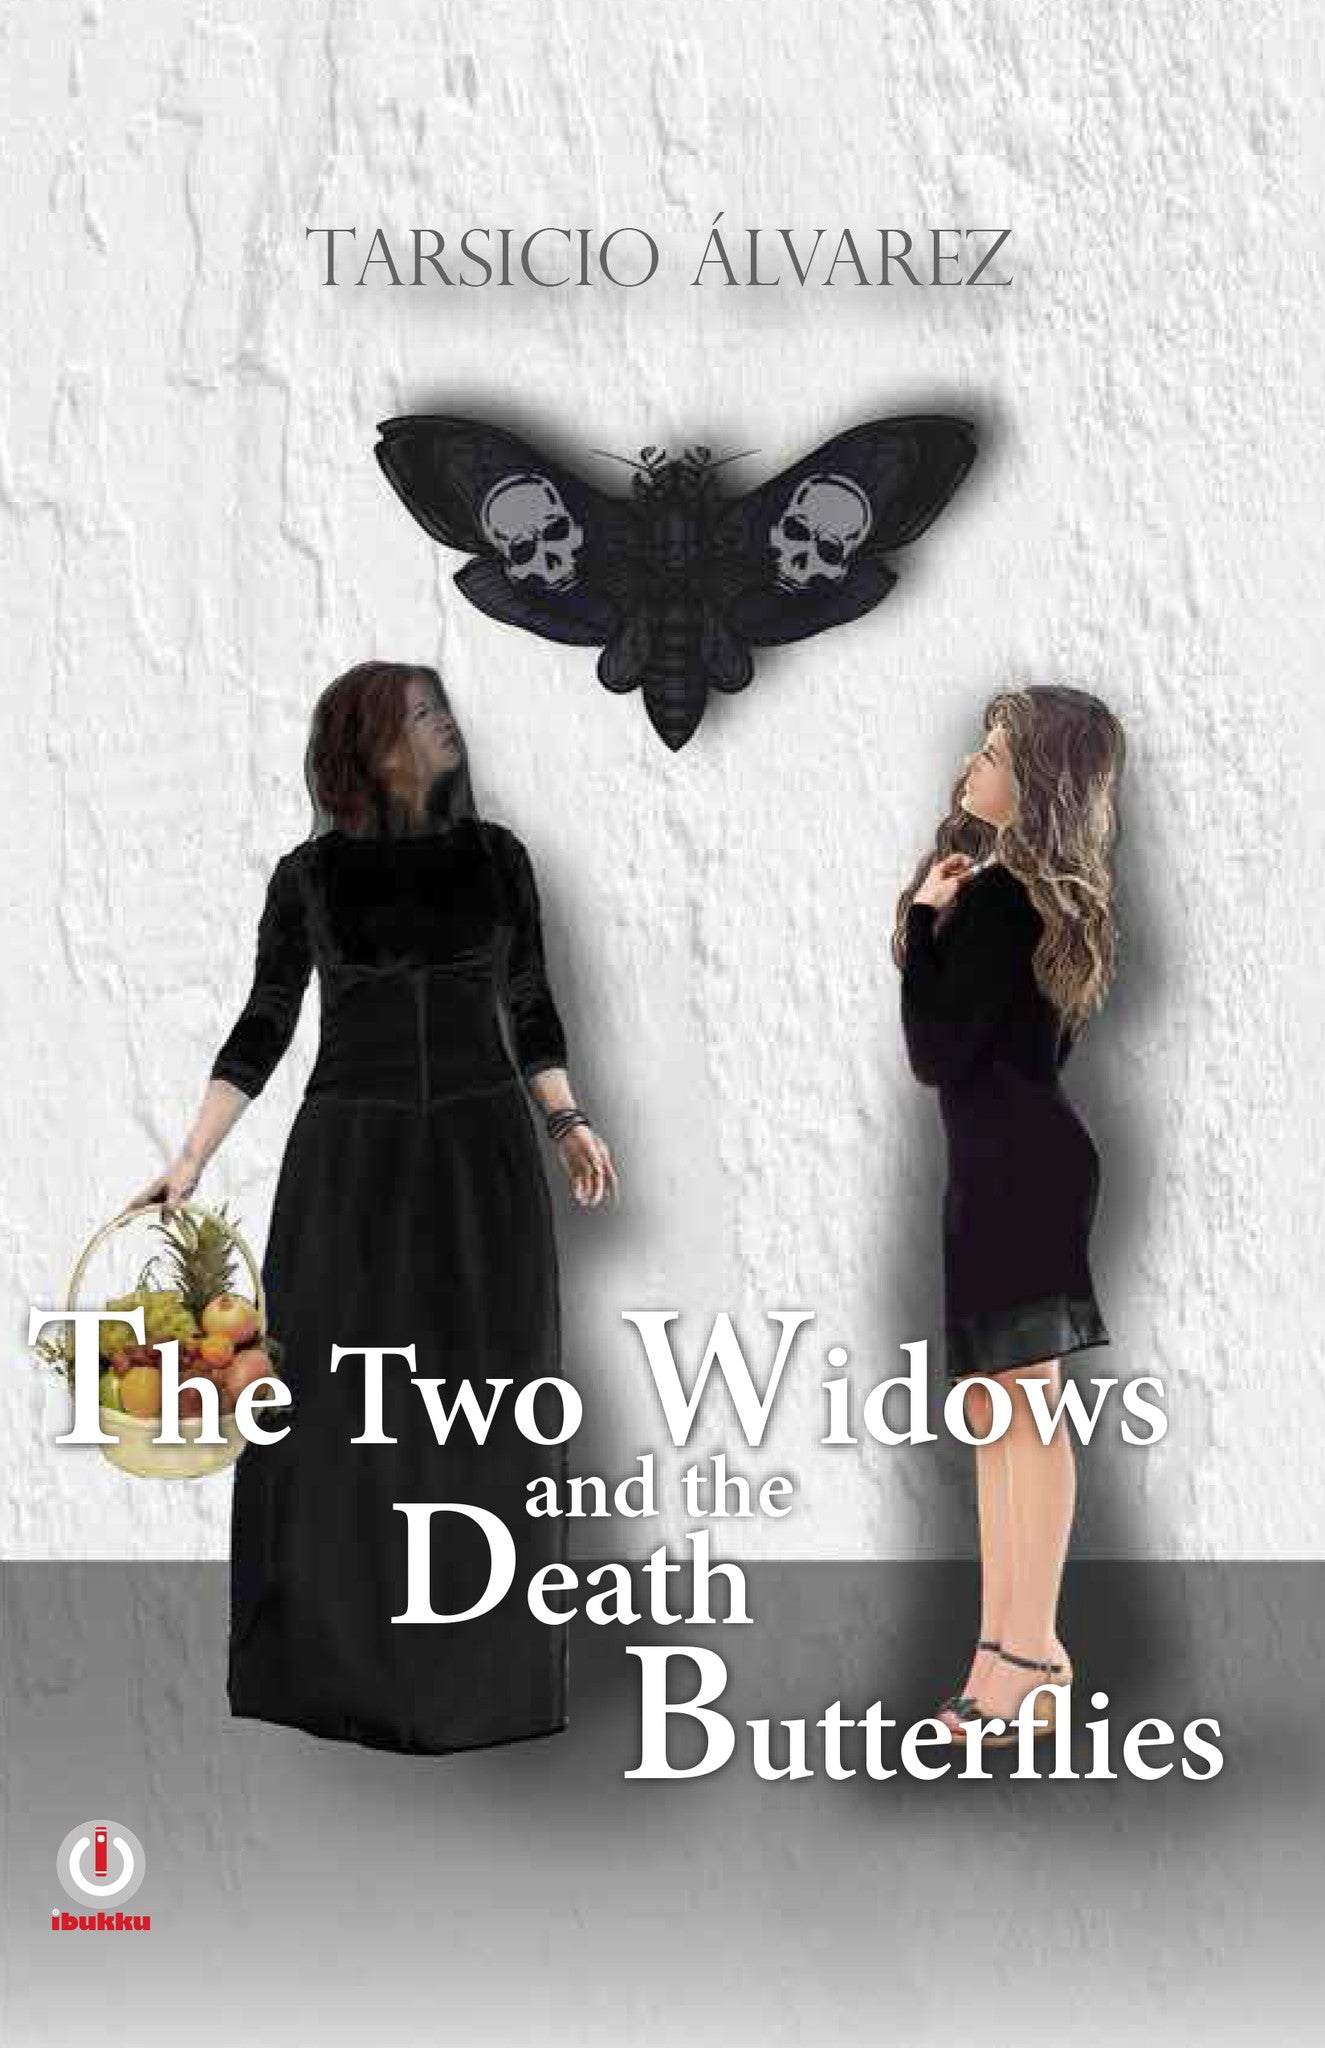 The Two Widows and the Death Butterflies (Paperback) - ibukku, LLC